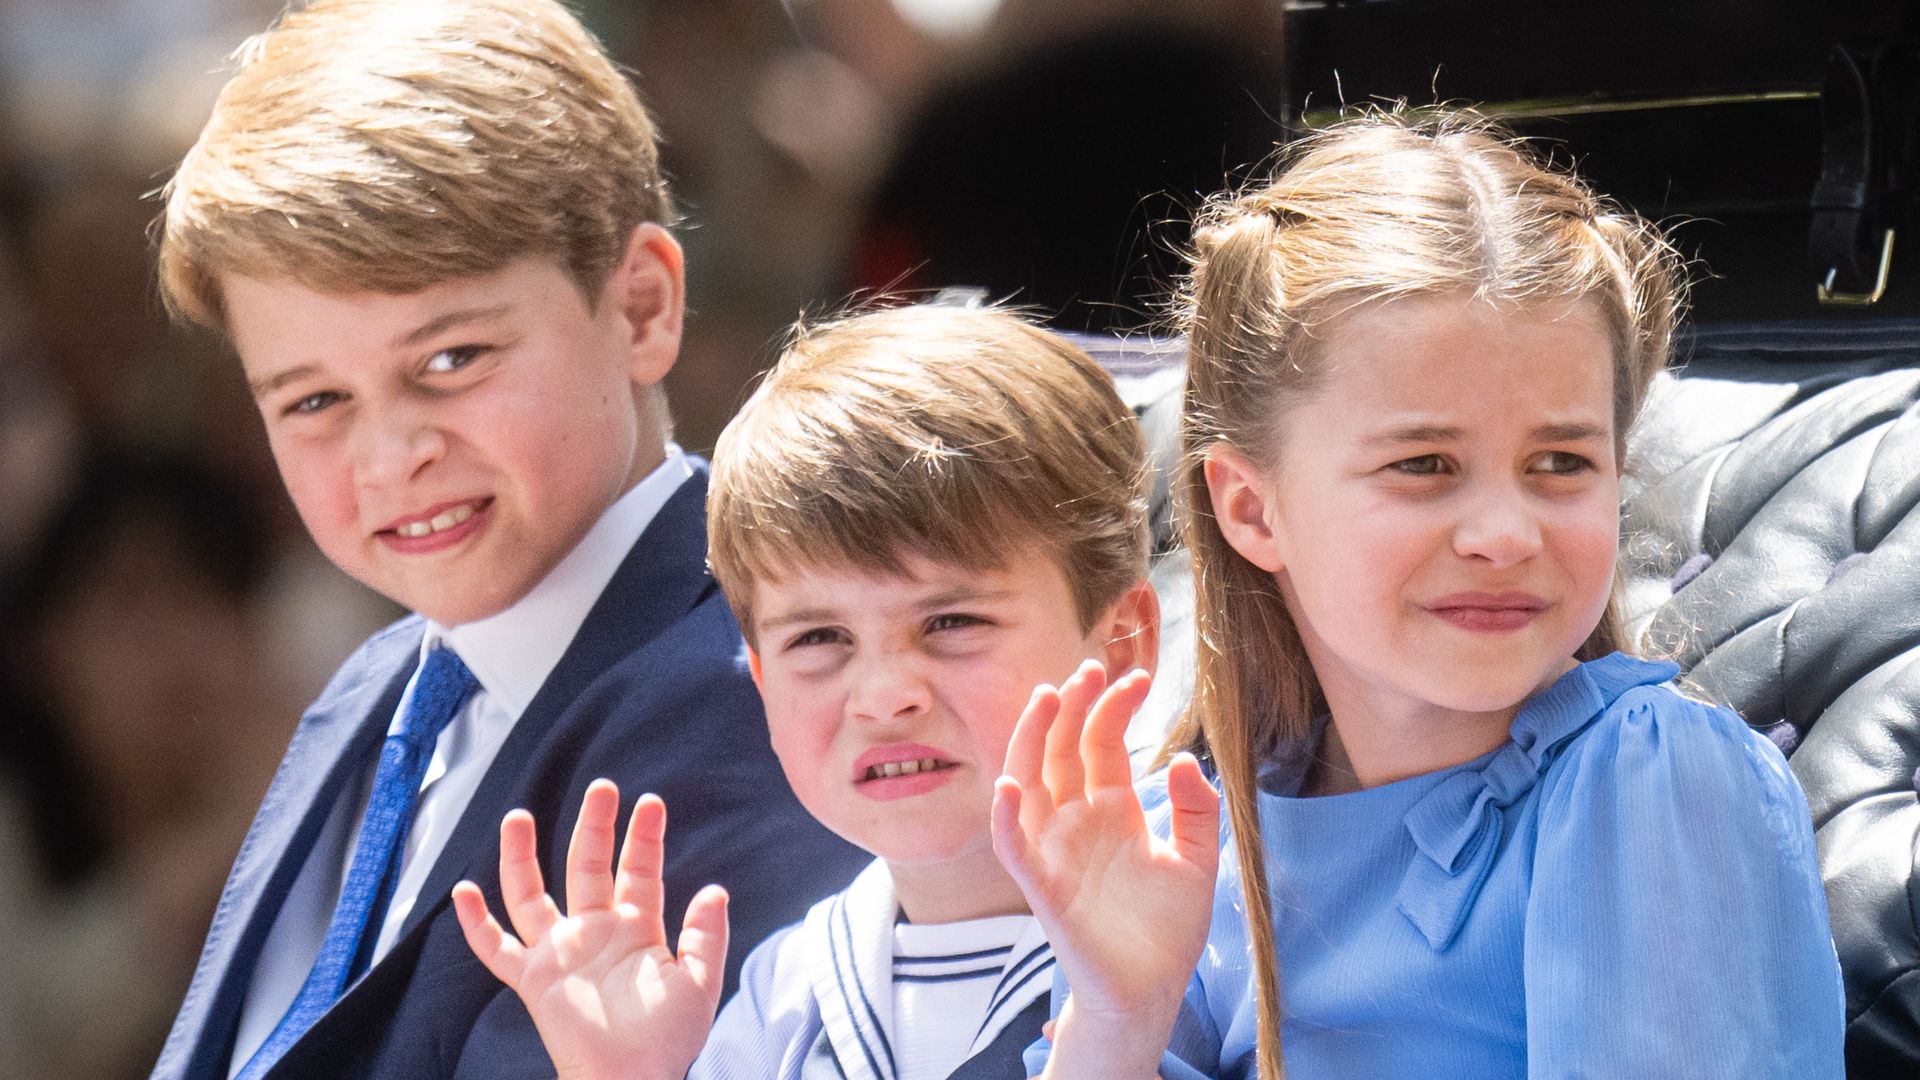 The challenge Prince George, Princess Charlotte and Prince Louis could face in future #Loui